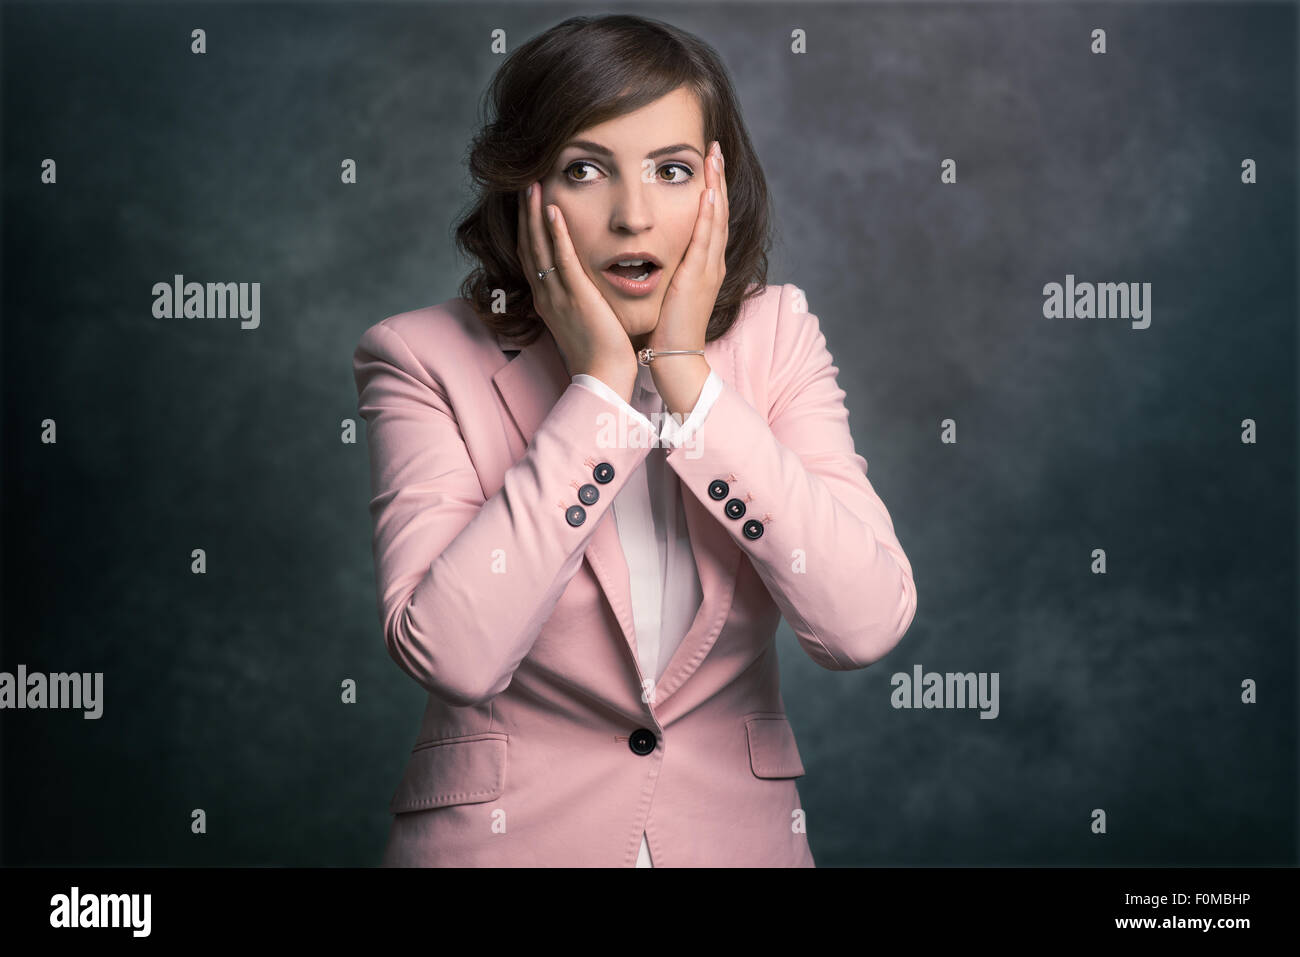 Young woman reacting in shock and horror with her mouth agape and hands raised to her cheeks as she looks sideways to the left o Stock Photo